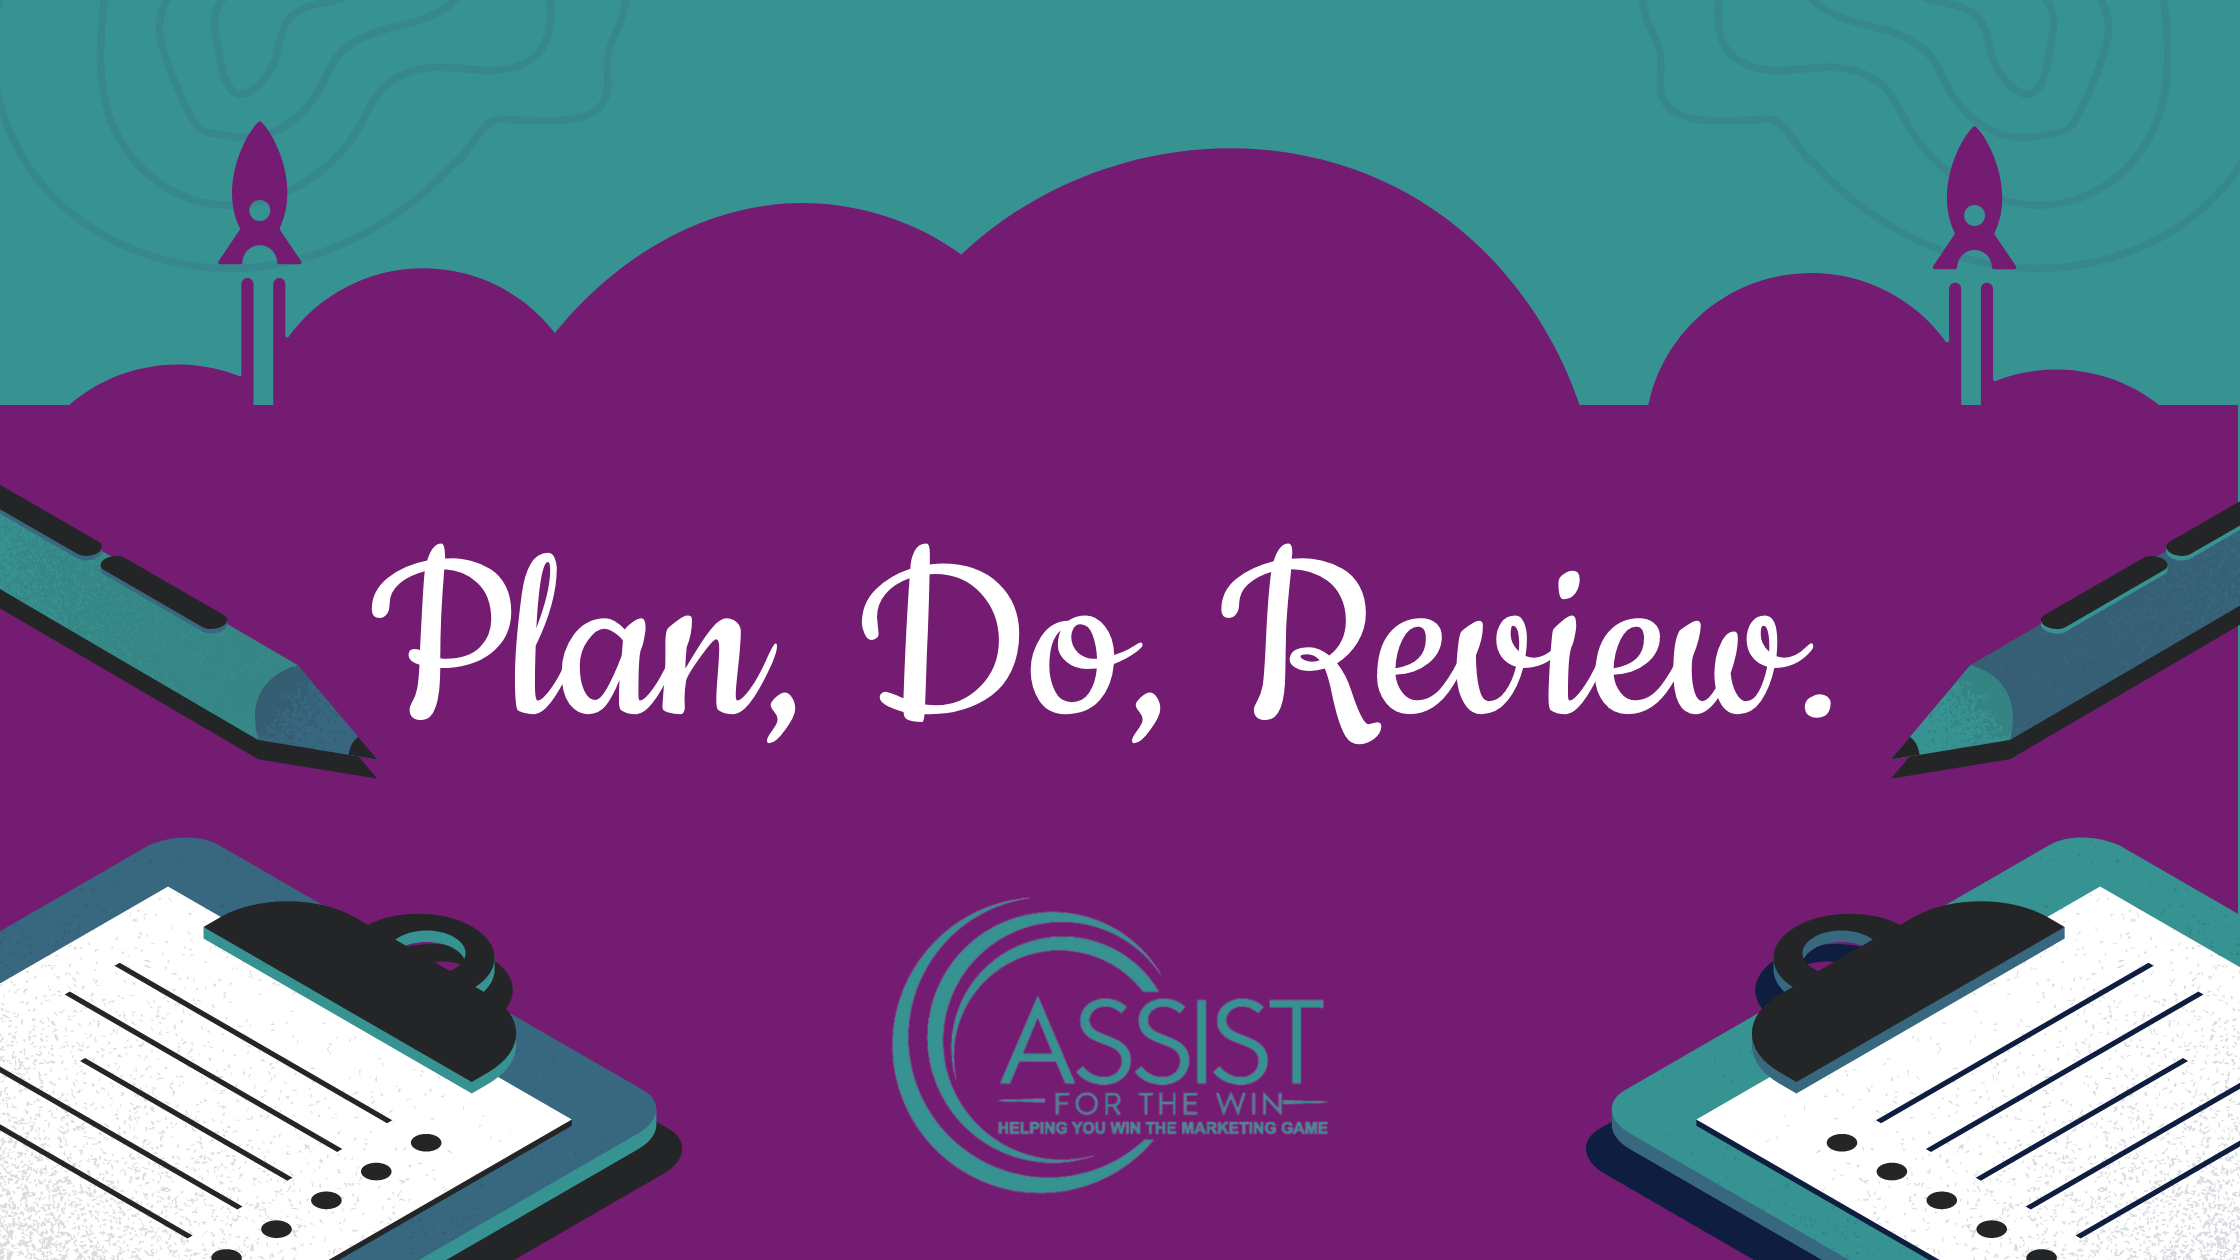 Plan, Do, Review